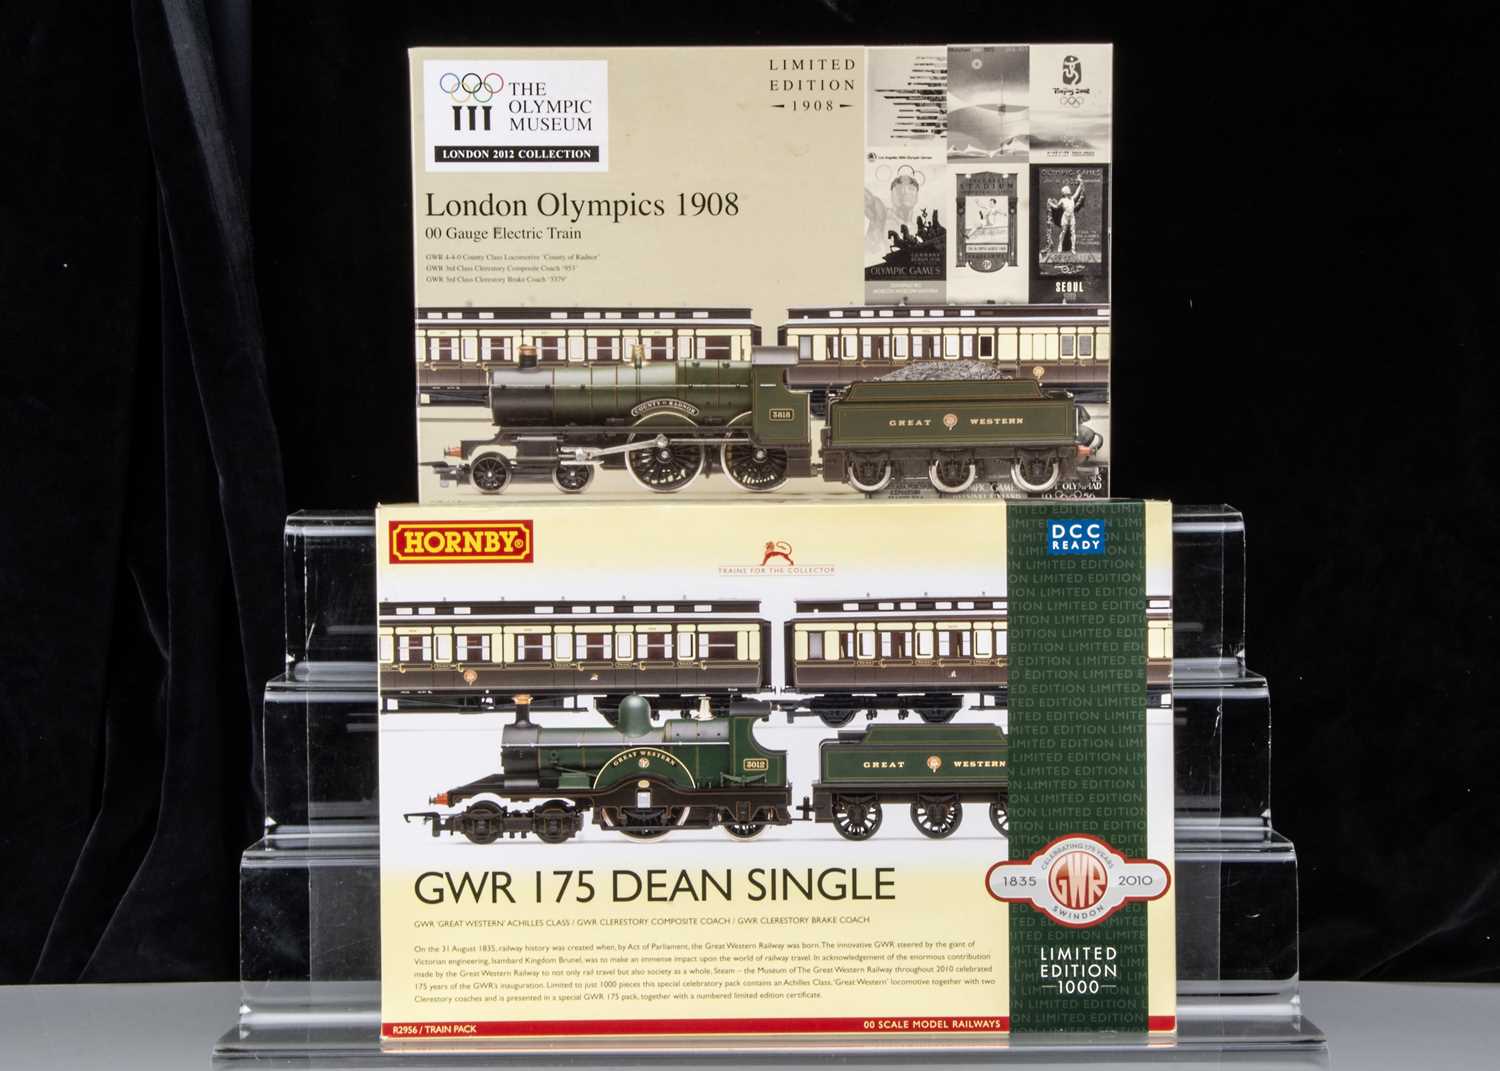 Lot 95 - Hornby China OO Gauge GWR Dean Single and London Olympics 1908 Steam Train Packs